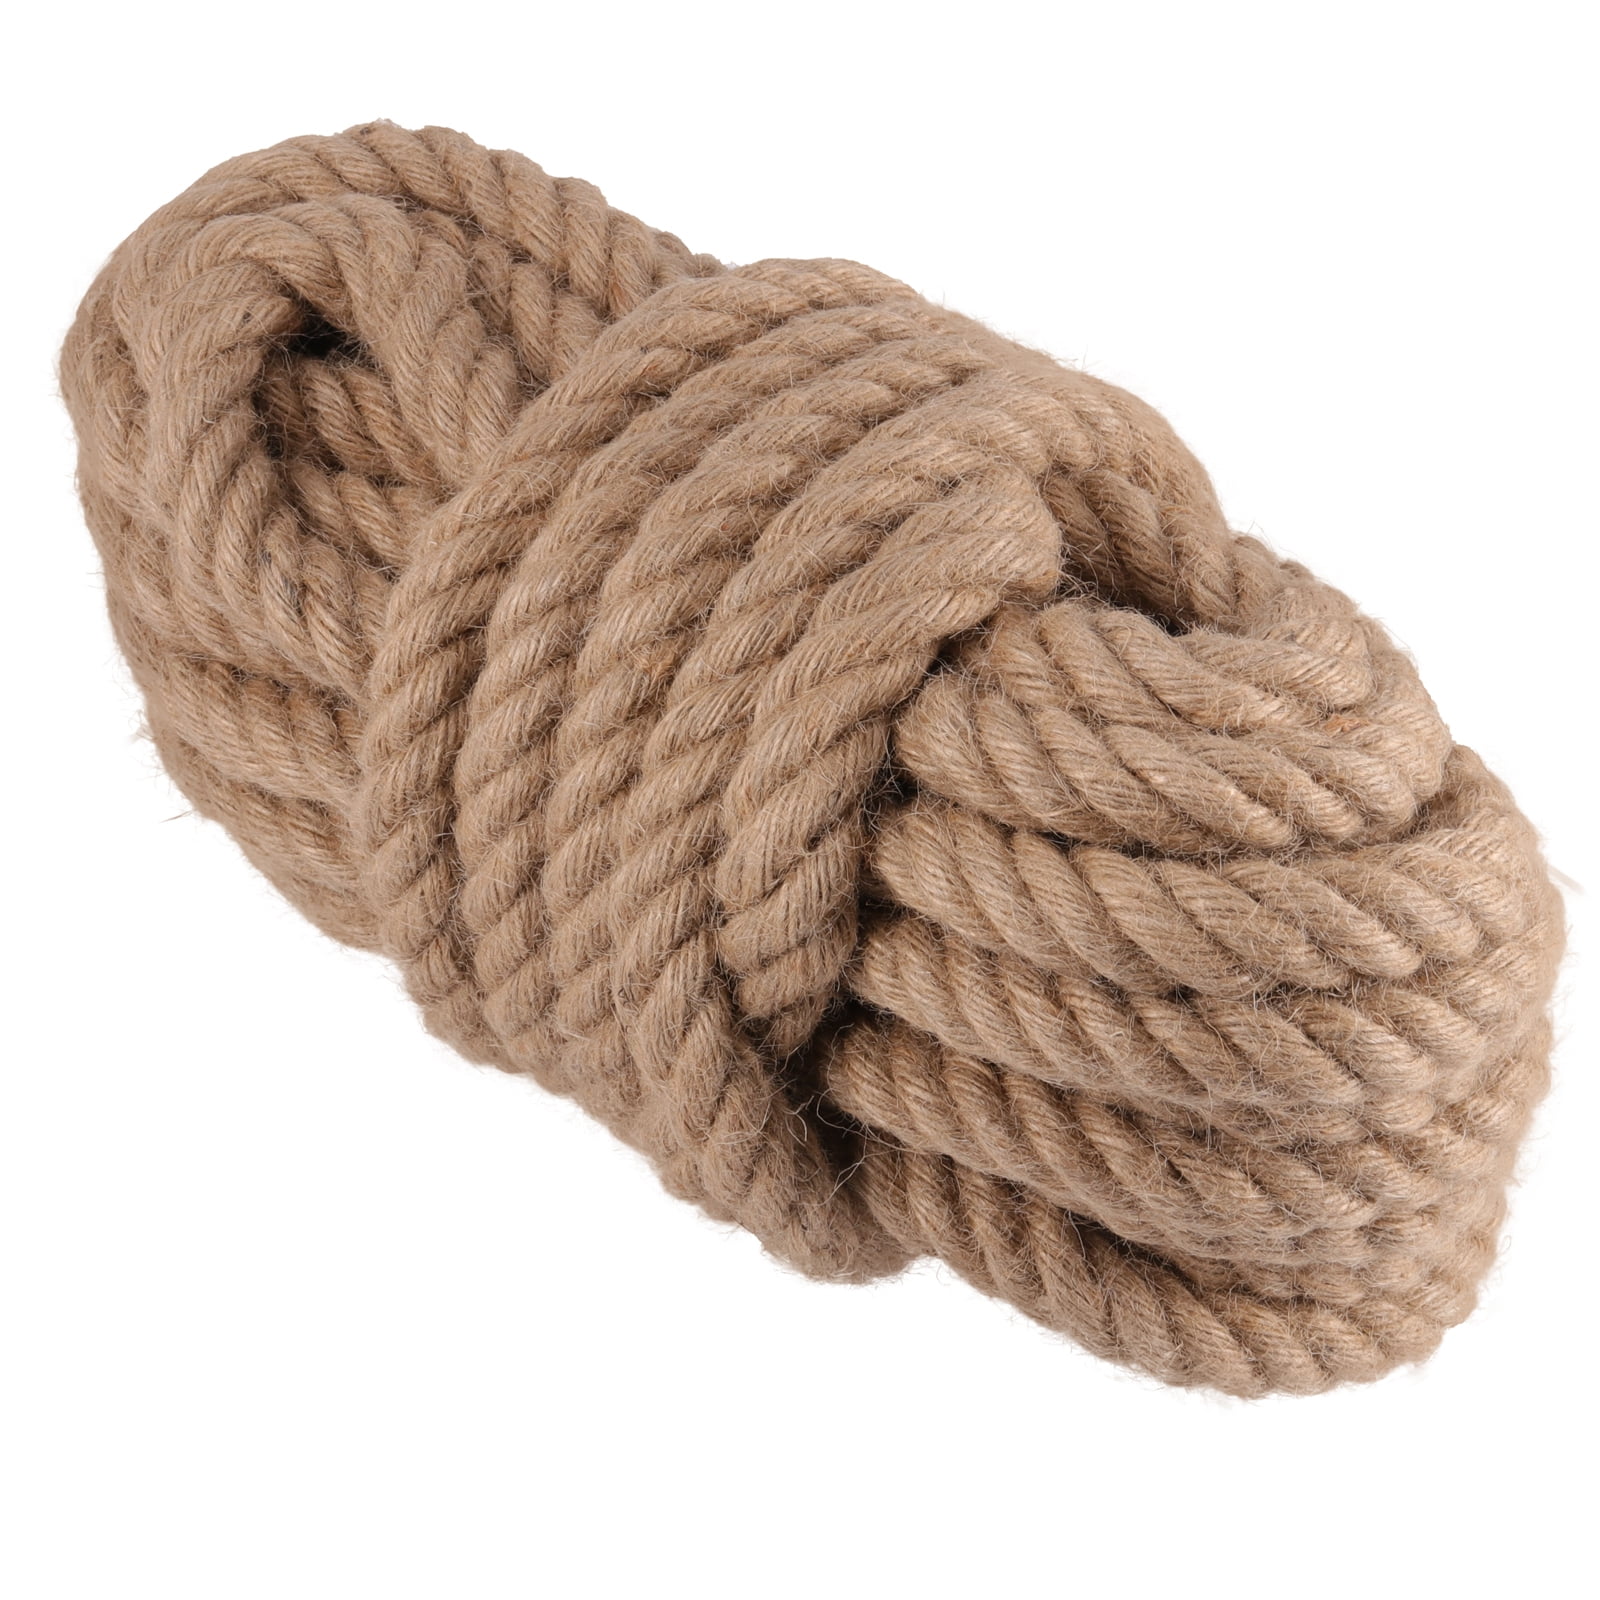 100% Natural Strong Jute Rope - LUOOV 6mm Thickness India